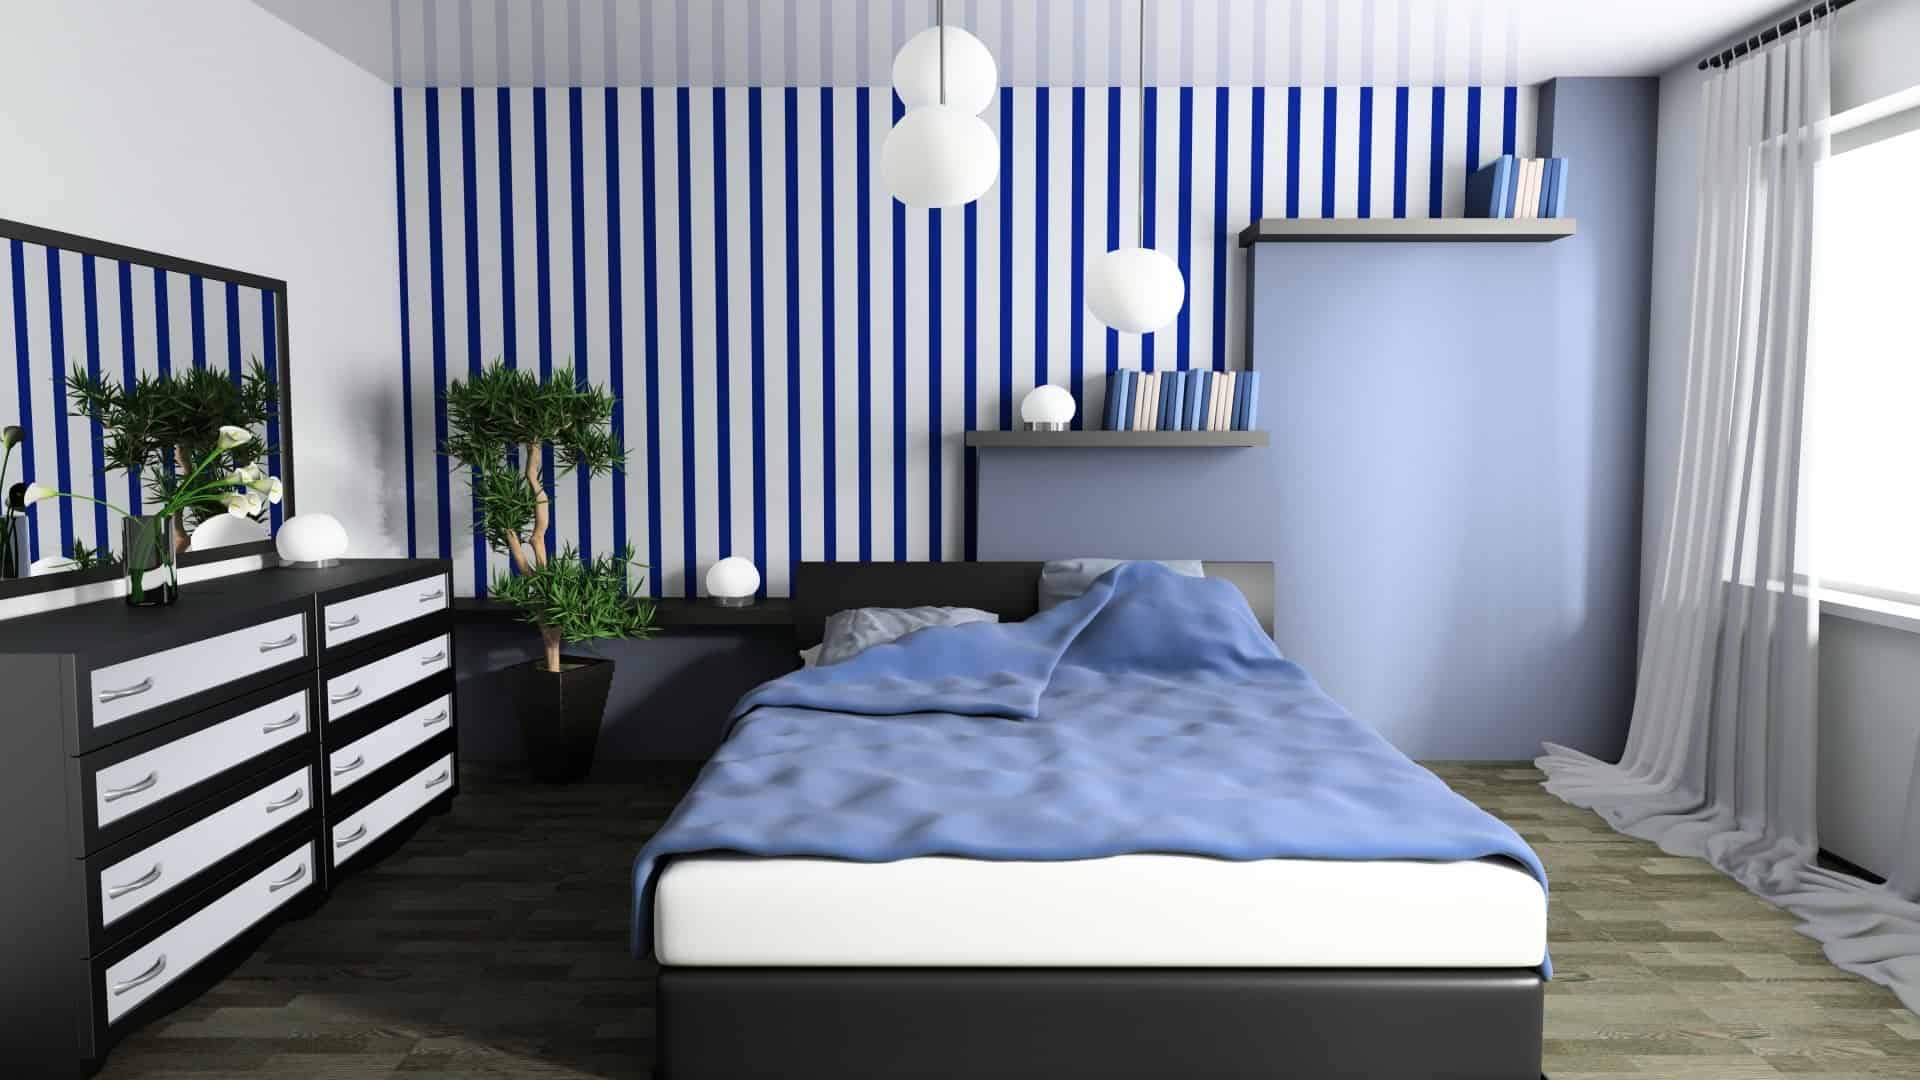 Can’t decide on what blue pattern to add to a room?